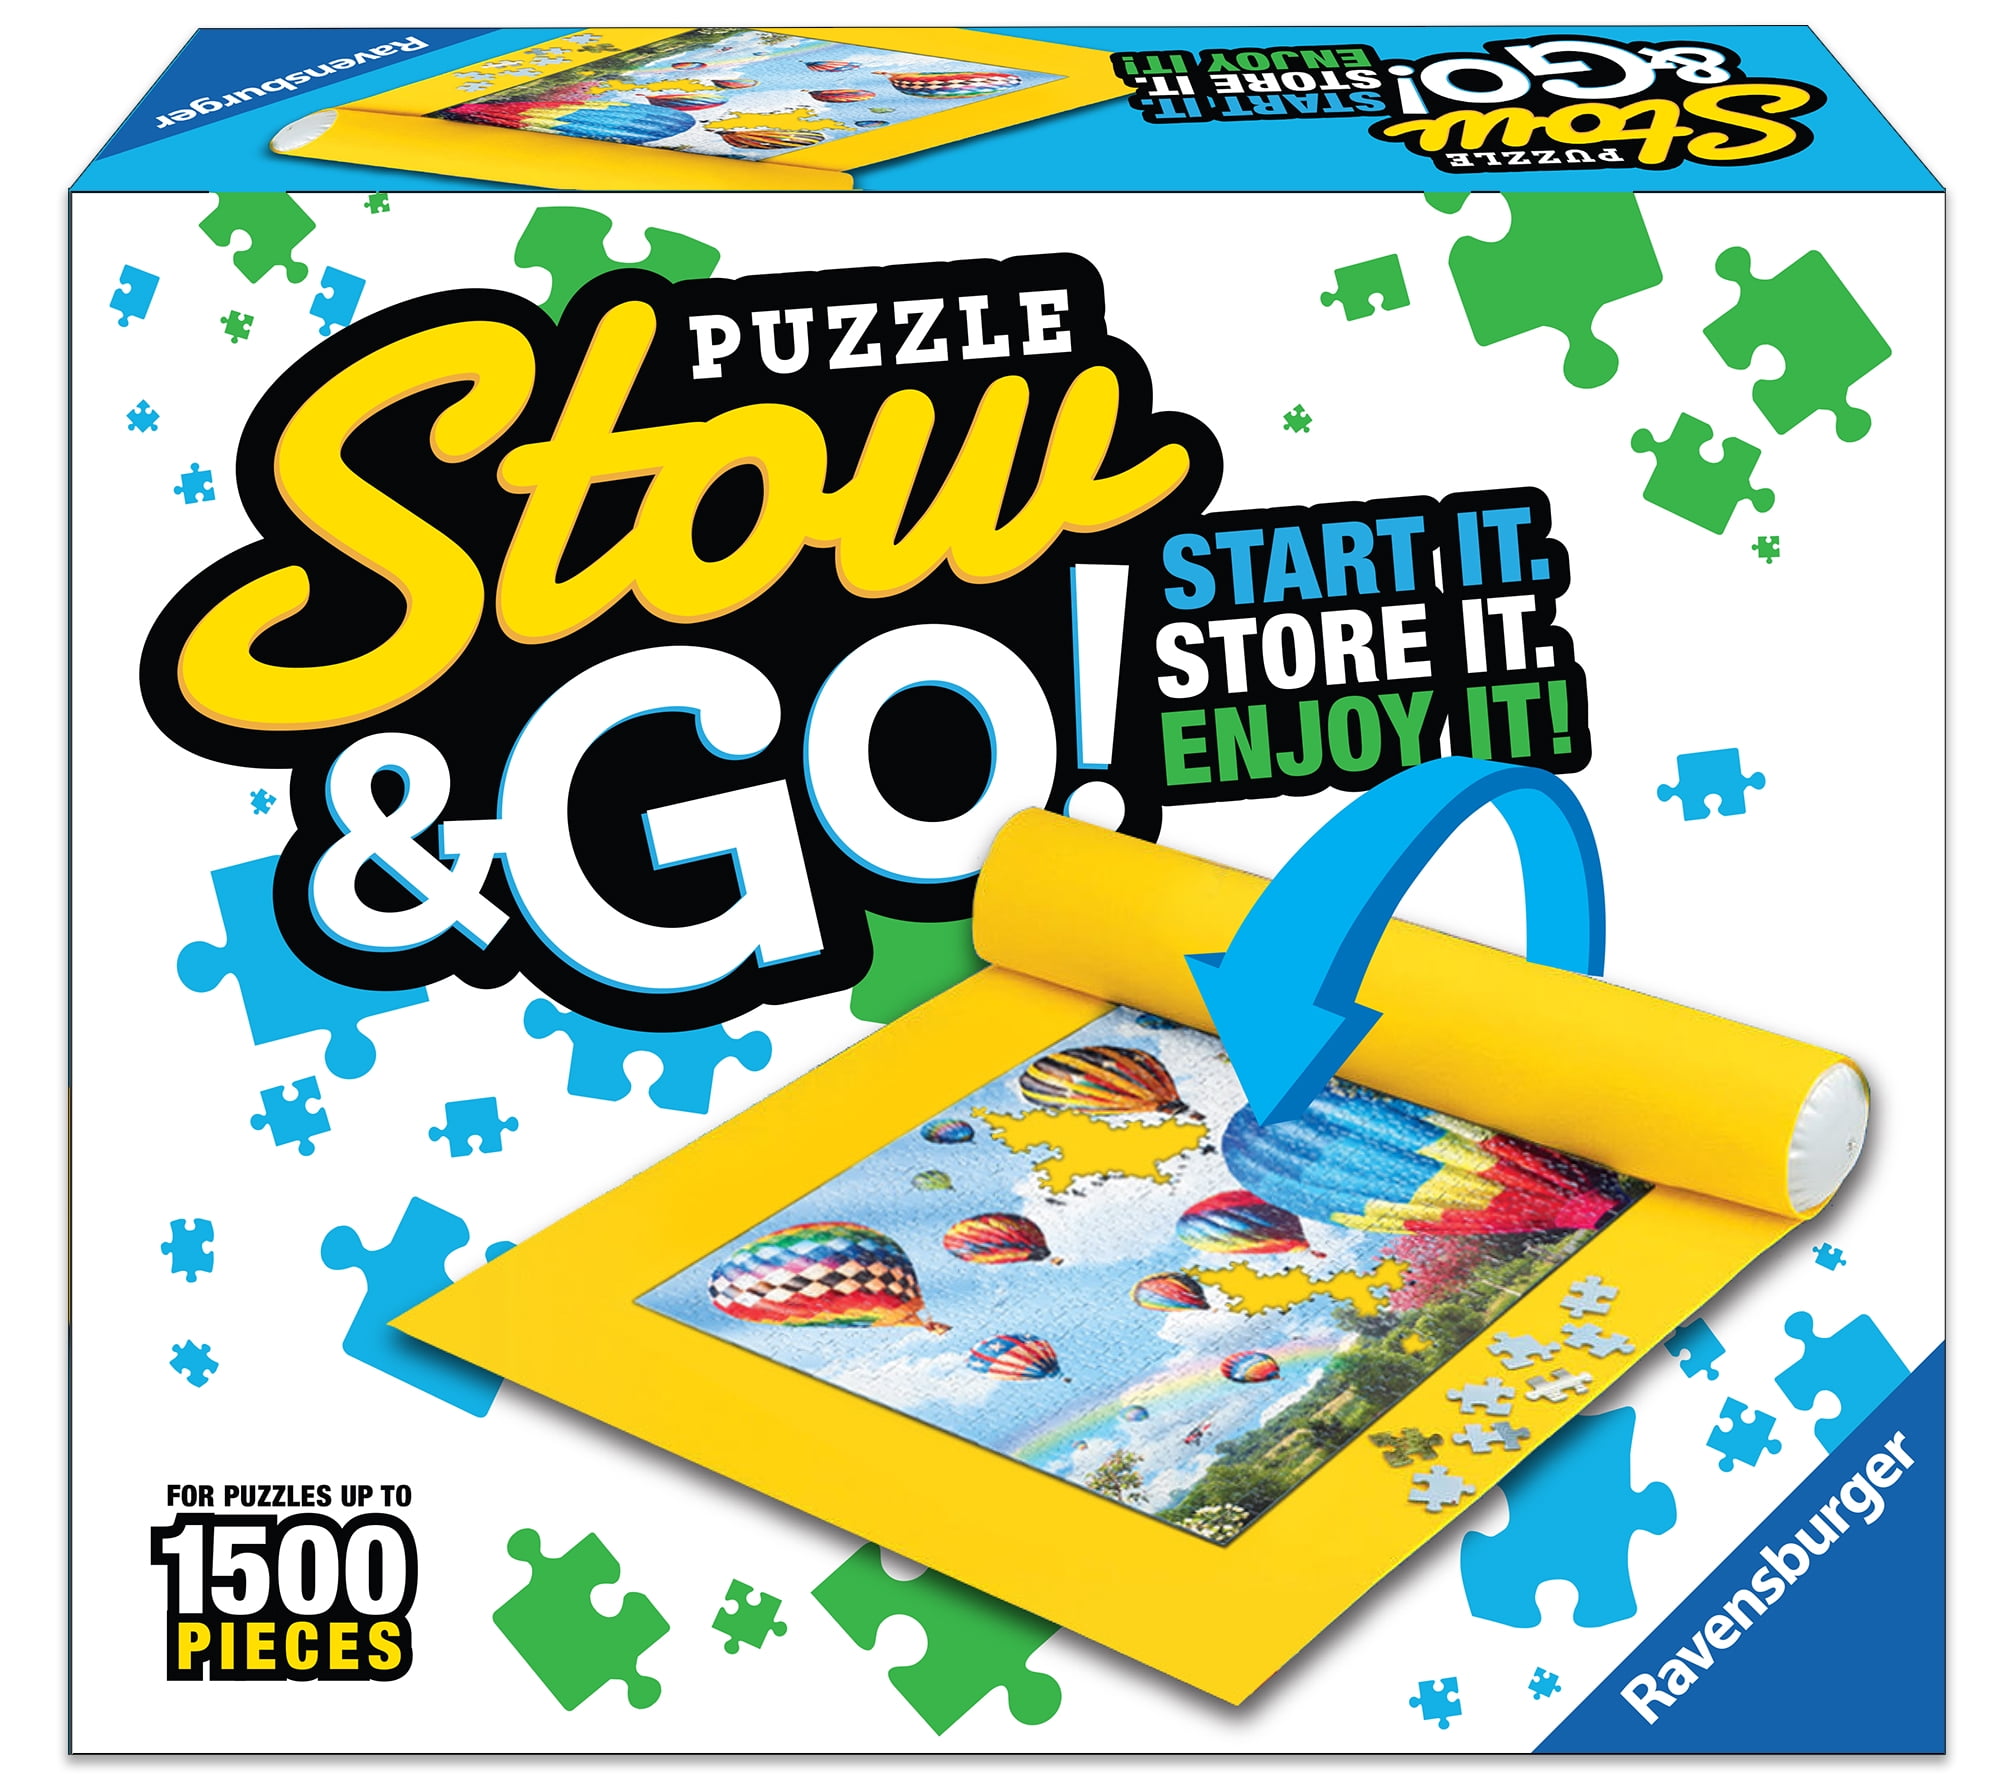 Ravensburger Stow & Go Puzzle Storage System  Stores Up to 1500 pieces (Puzzles Not Included)